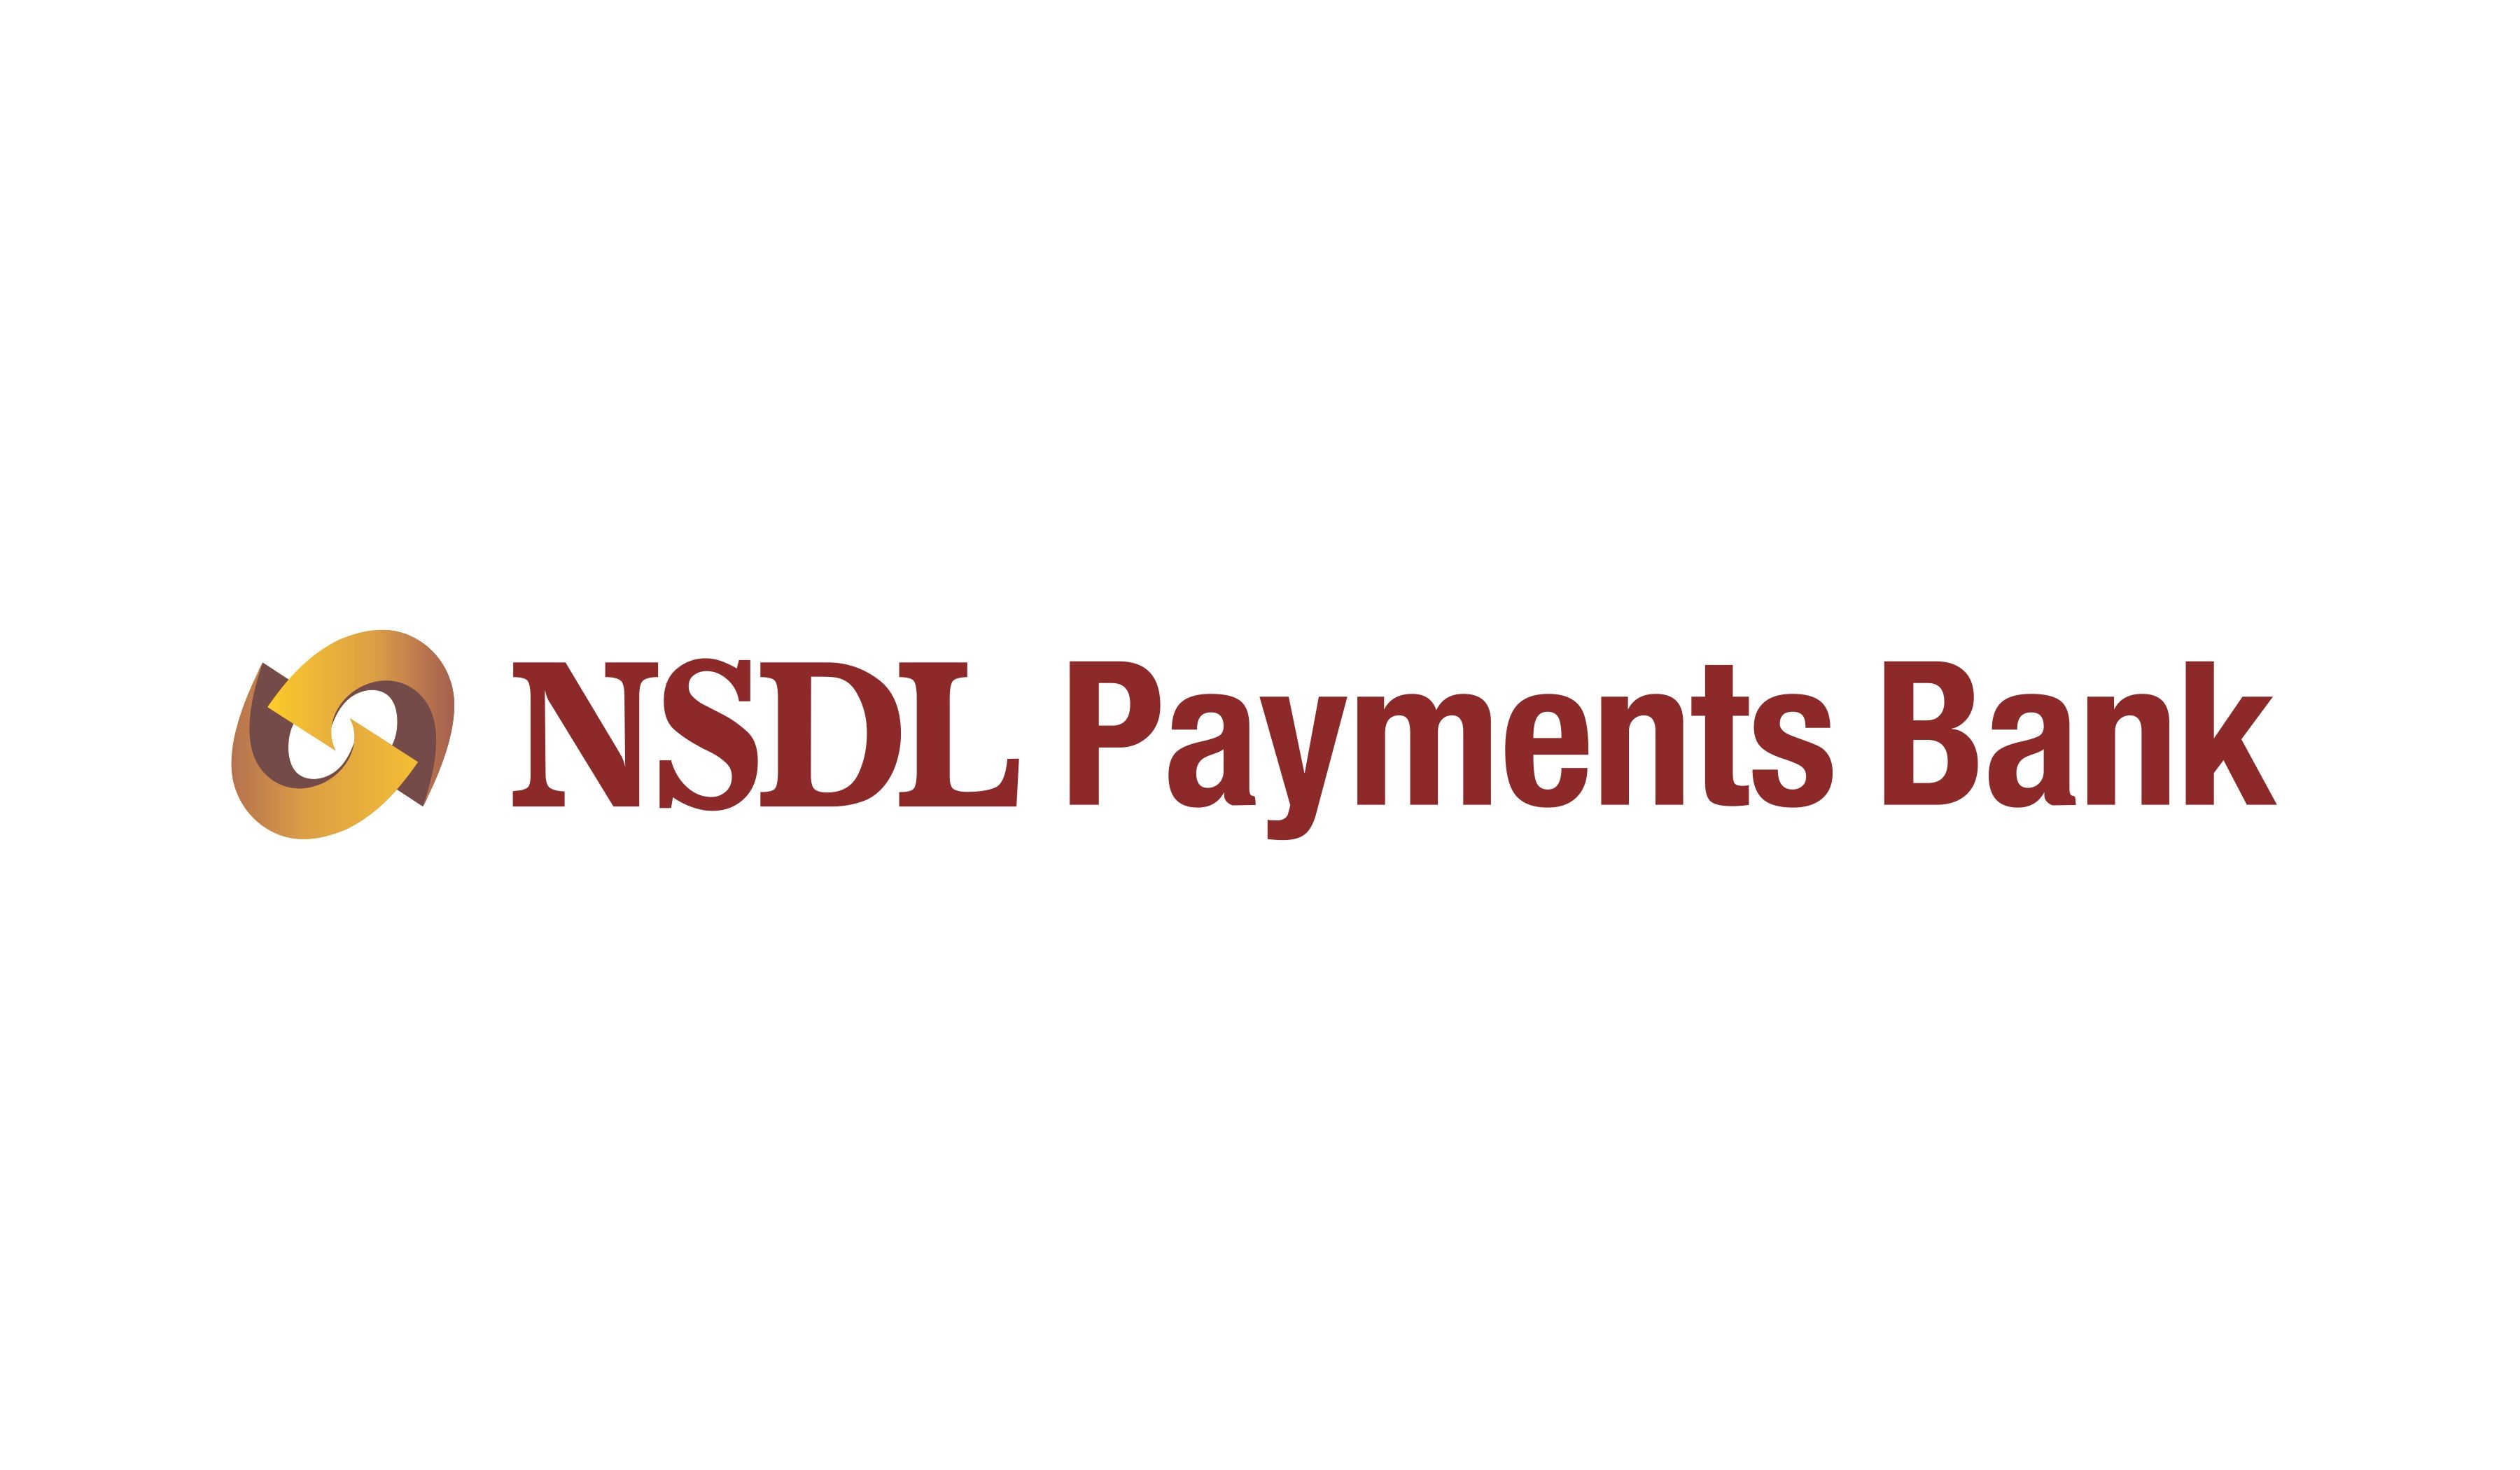 NSDL Payments Bank Limited LOWER PAREL MUMBAI IFSC Code Is NSPB0000001